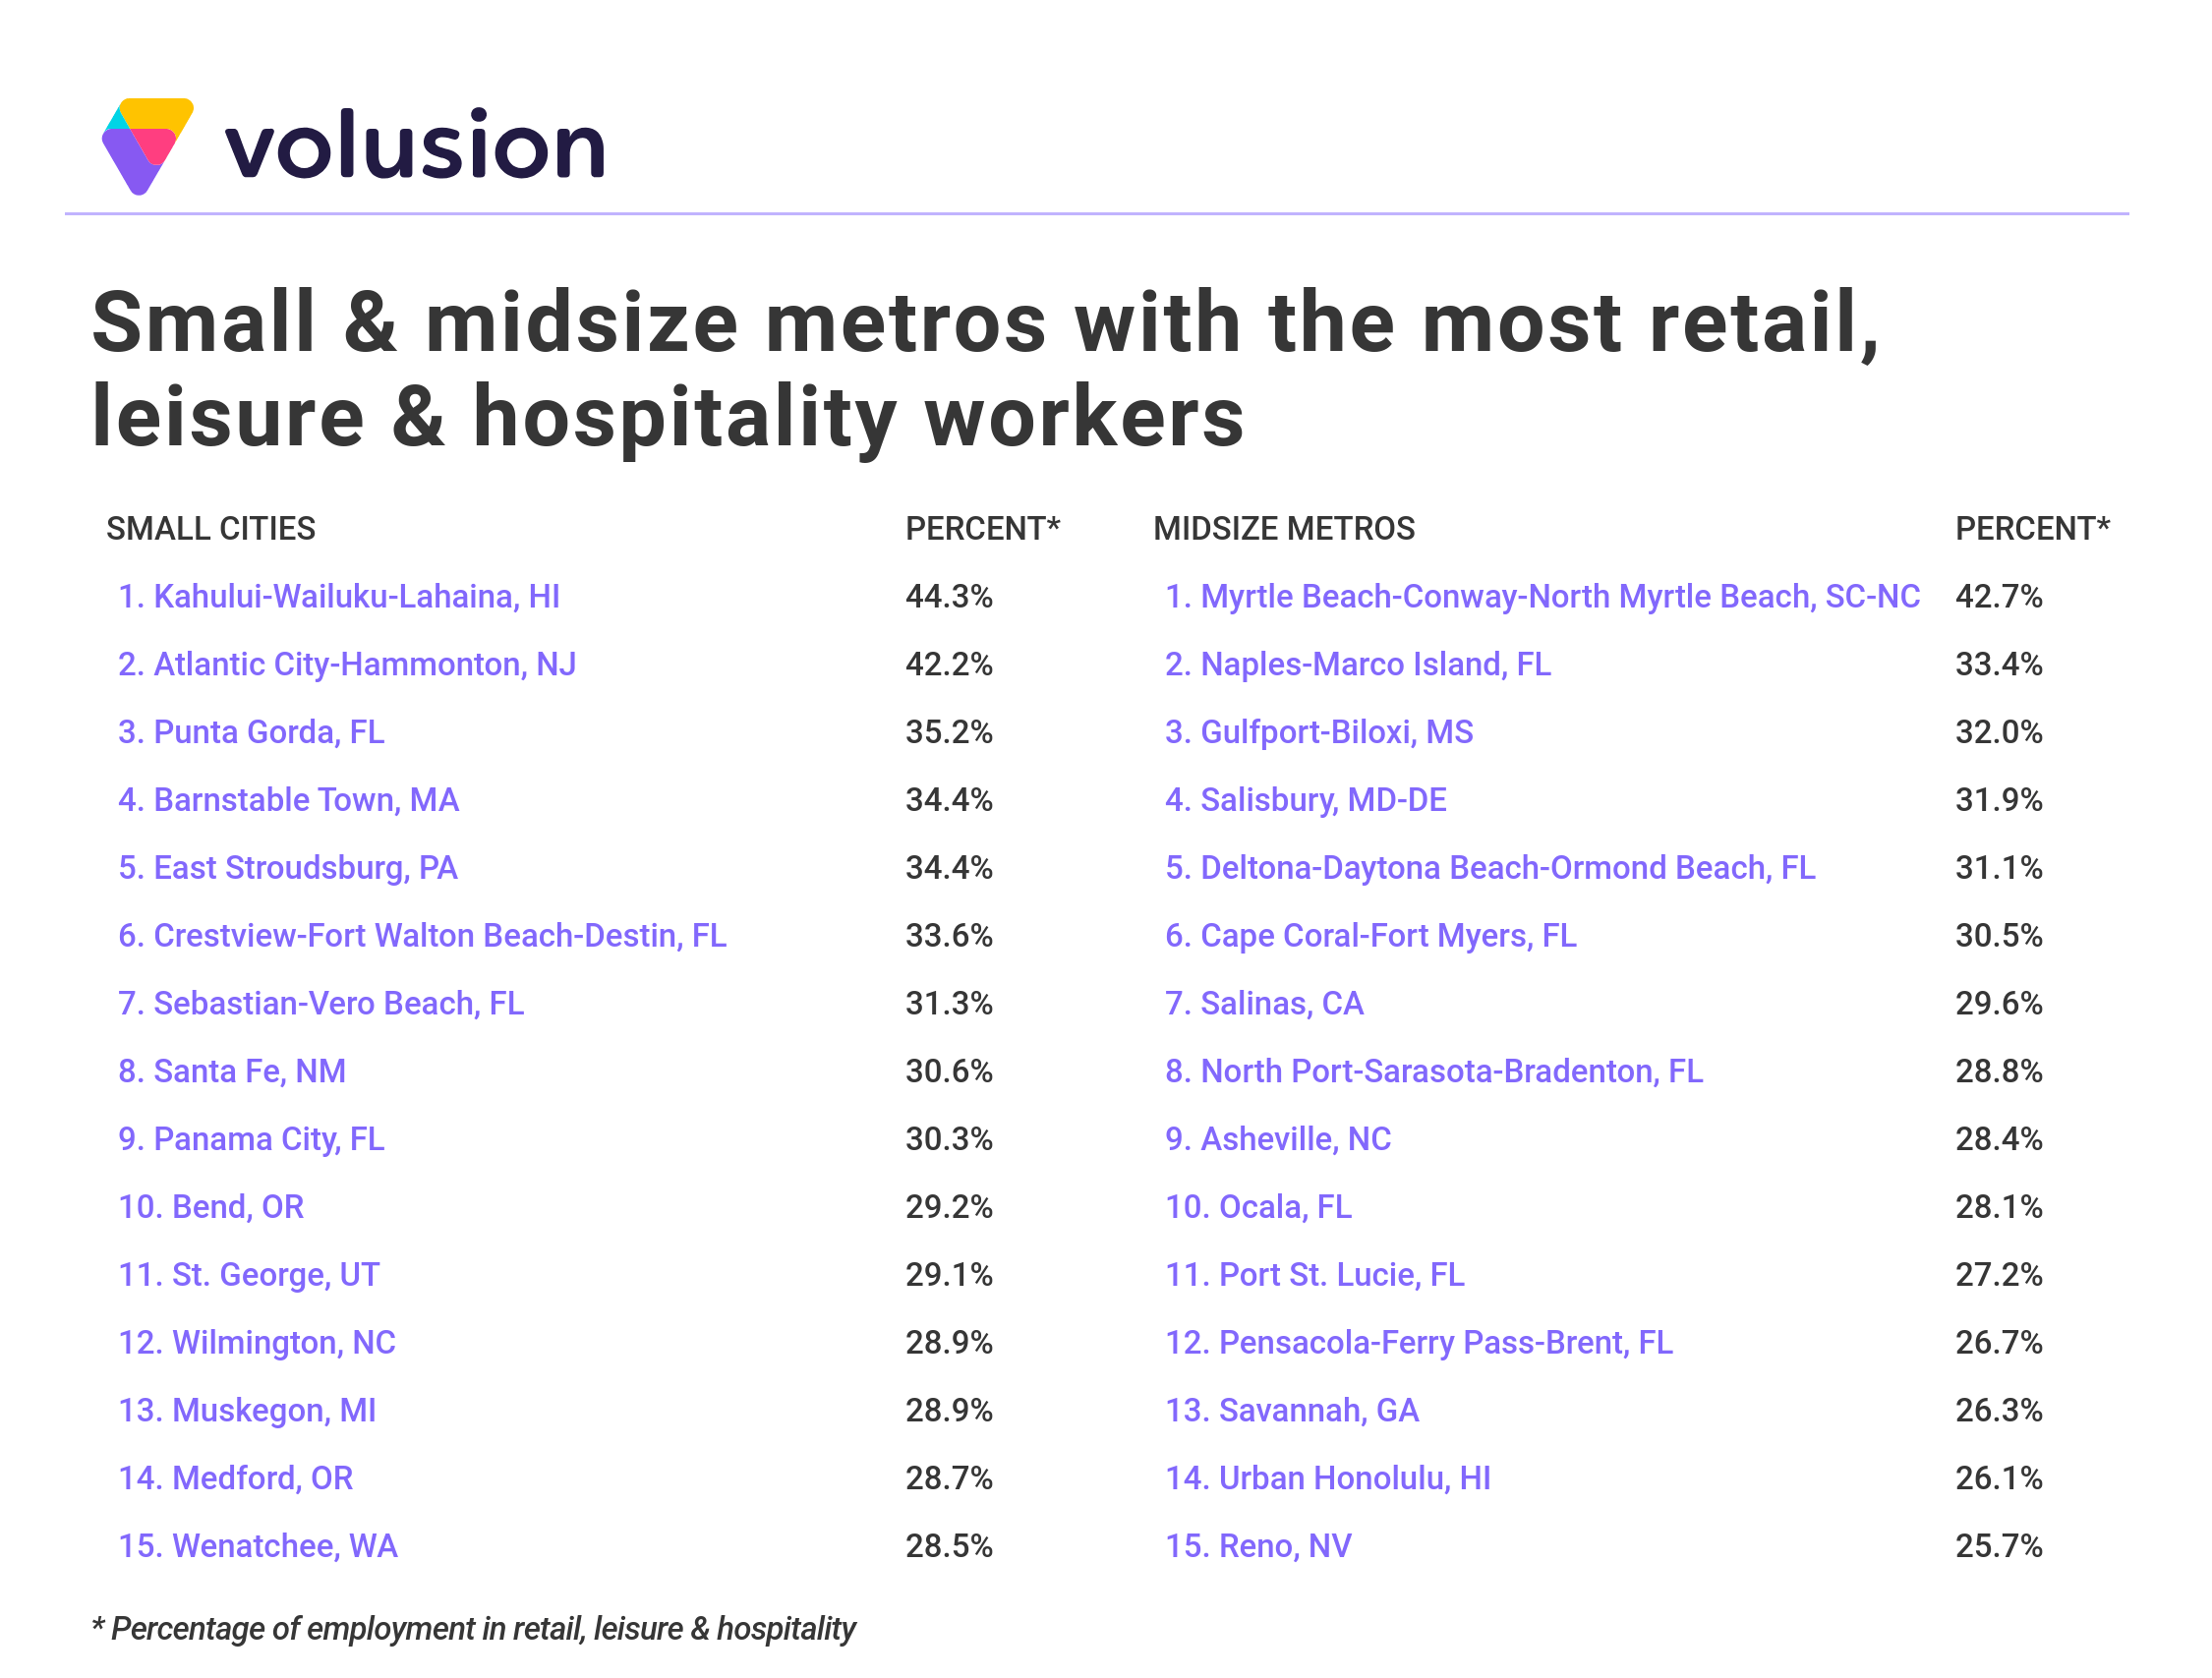 Table showing small and midsize metros with the most retail, leisure, and hospitality workers.